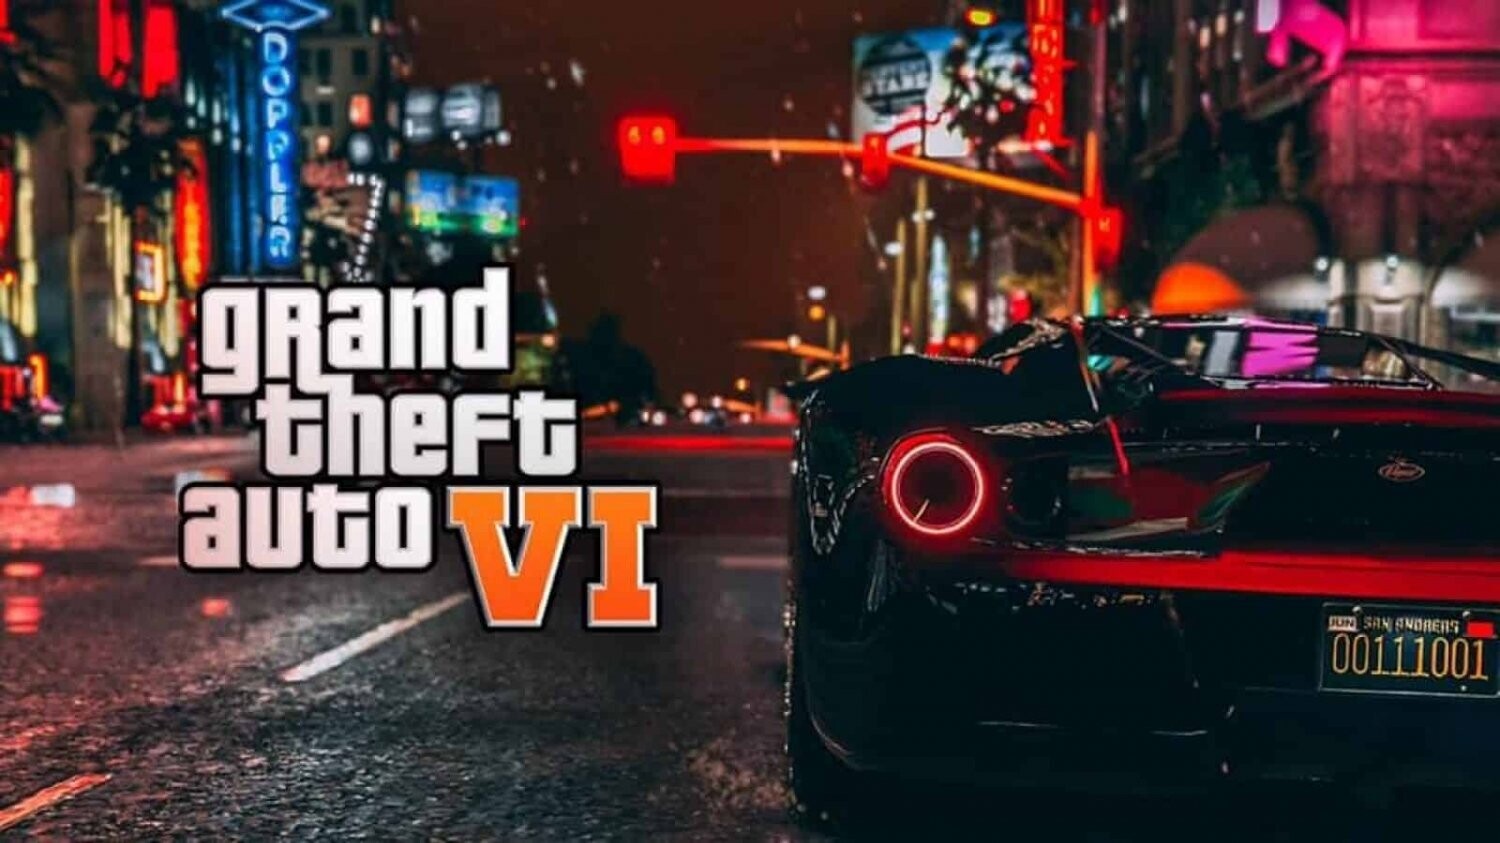 GTA 6's budget is well over $2 billion, 10 times more than GTA V's and 4  times more than RDR2's. : r/GTA6